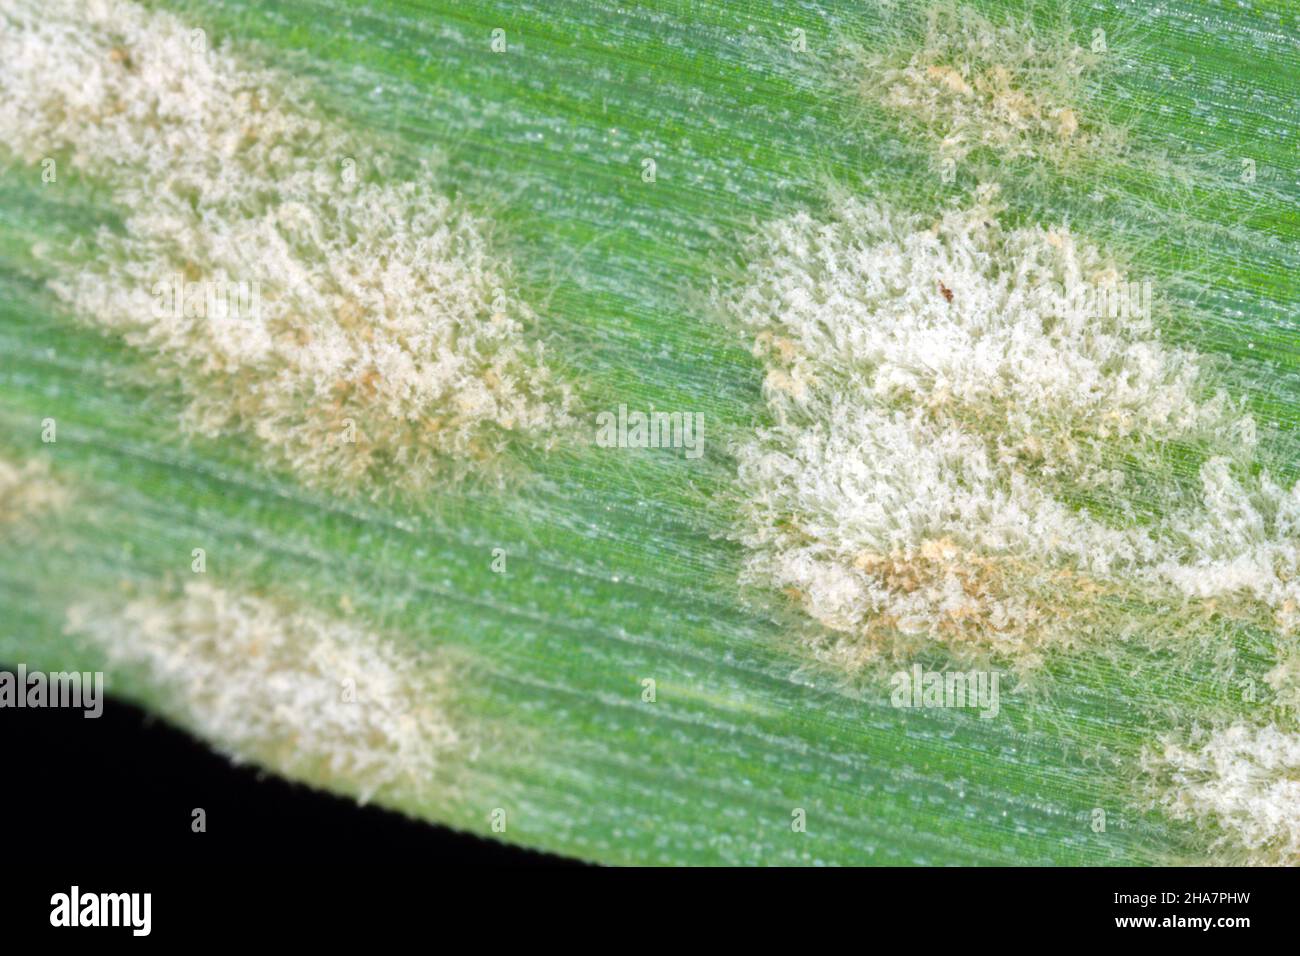 Barley powdery mildew or corn mildew caused by the fungus Blumeria graminis is a significant disease affecting cereal crops. Stock Photo